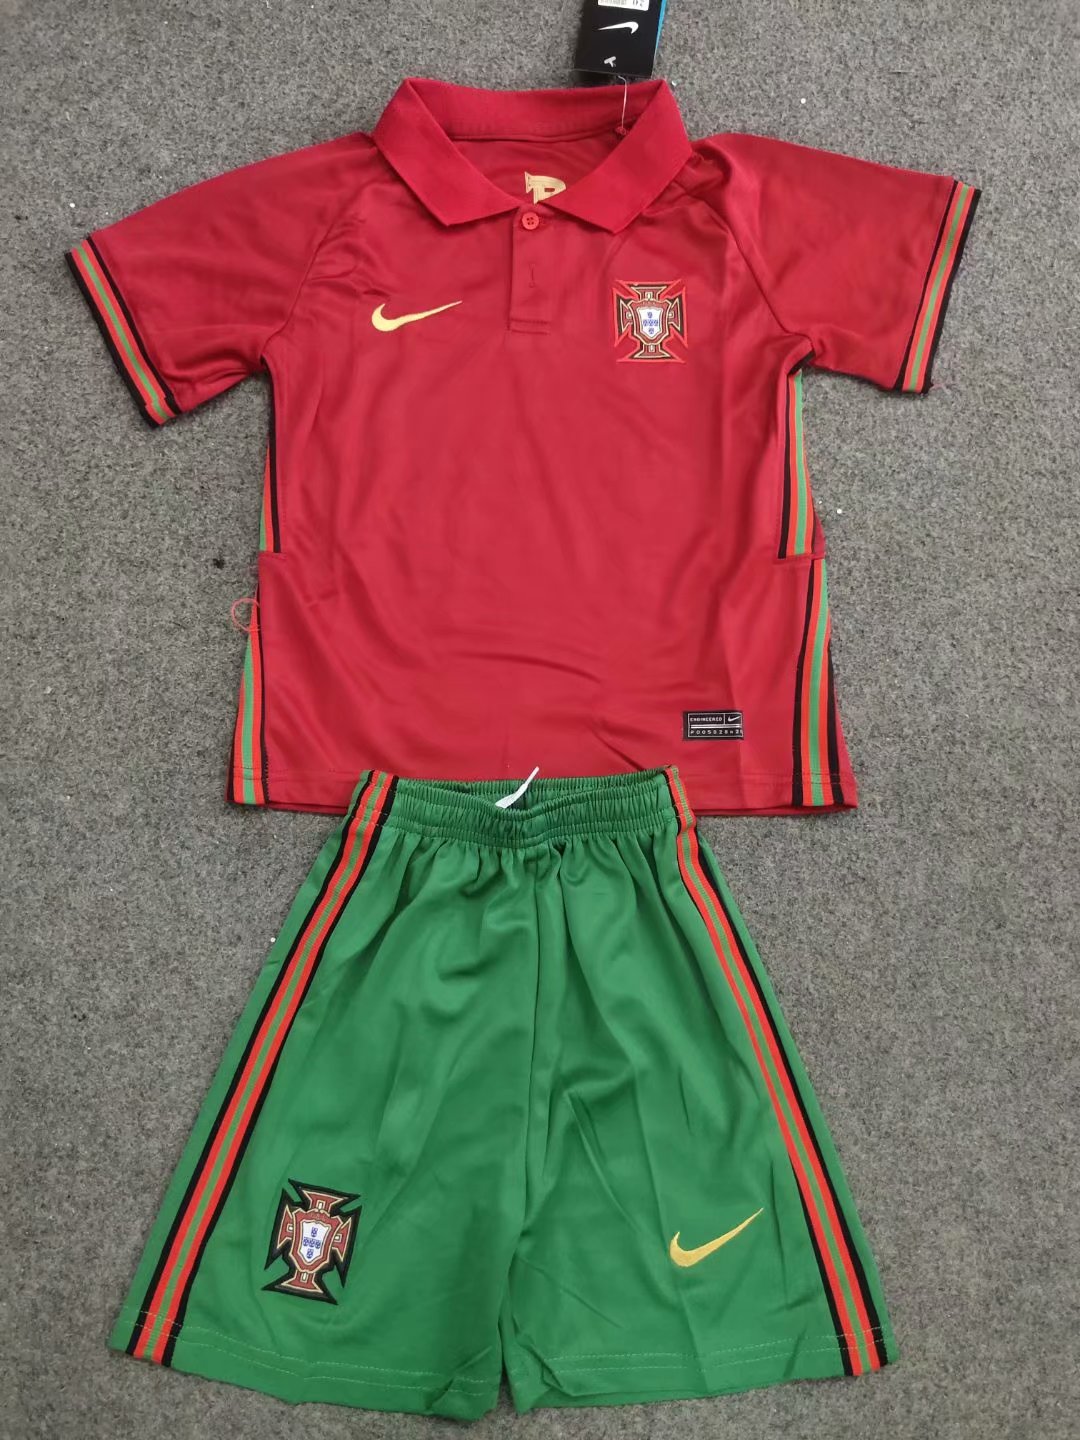 Kids-Portugal 2020 European Cup Home Soccer Jersey